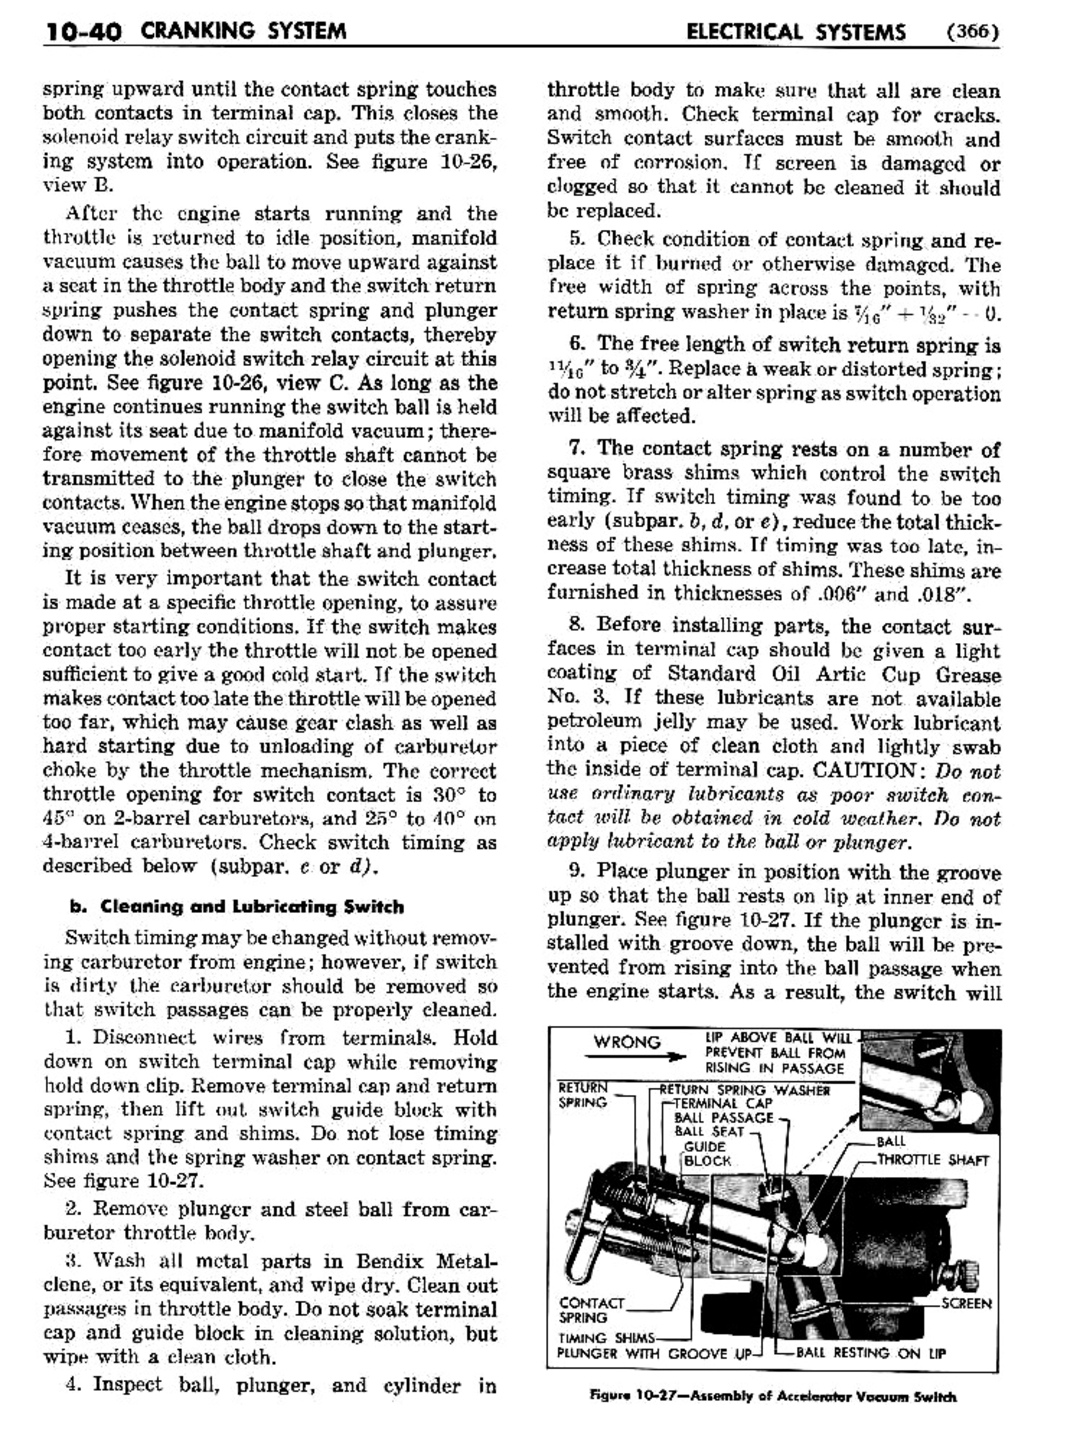 n_11 1956 Buick Shop Manual - Electrical Systems-040-040.jpg